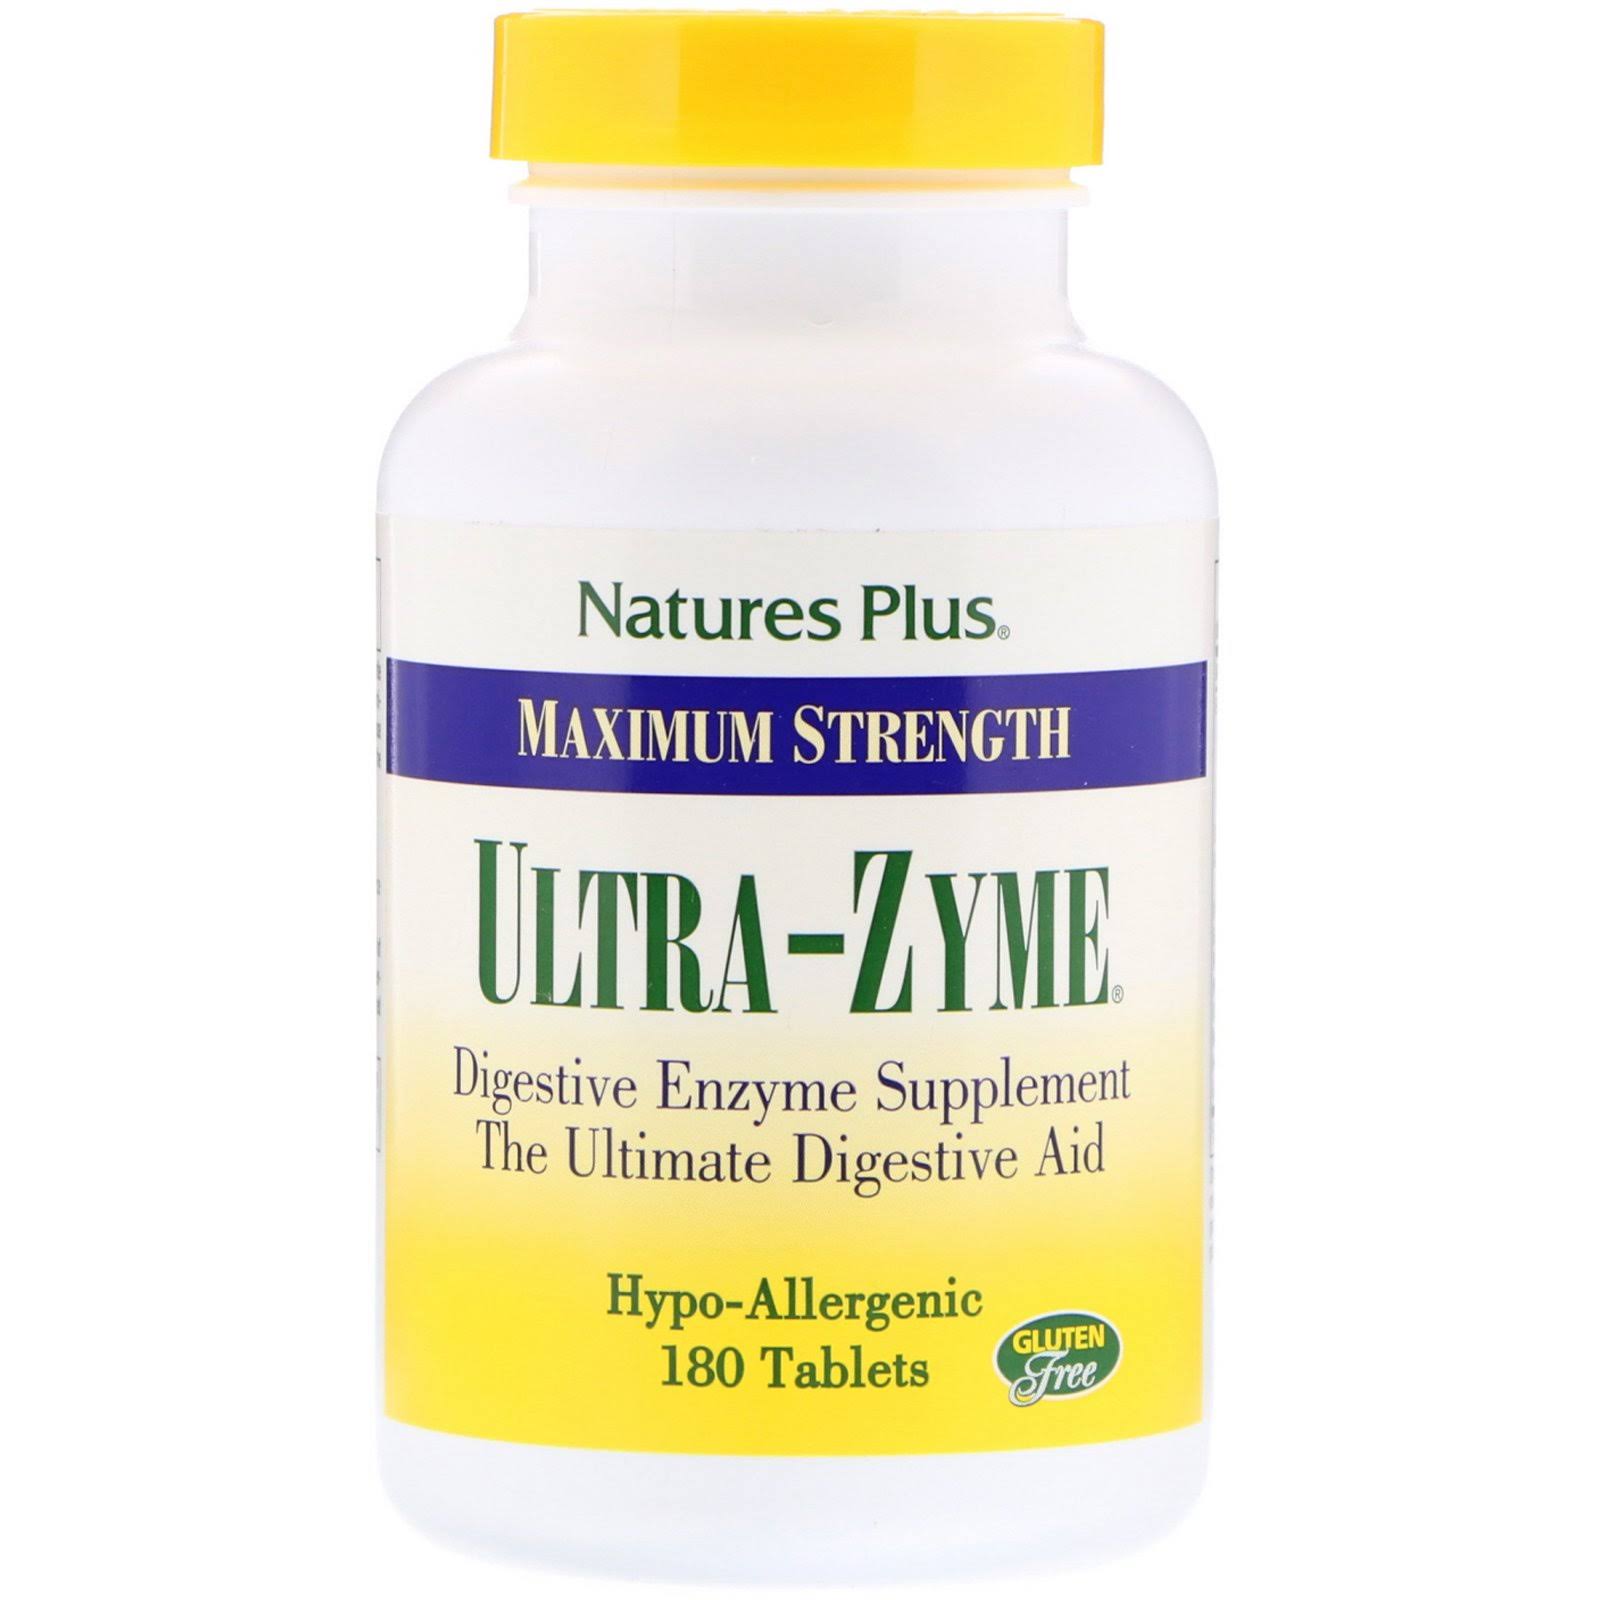 Nature's Plus Ultra-Zyme